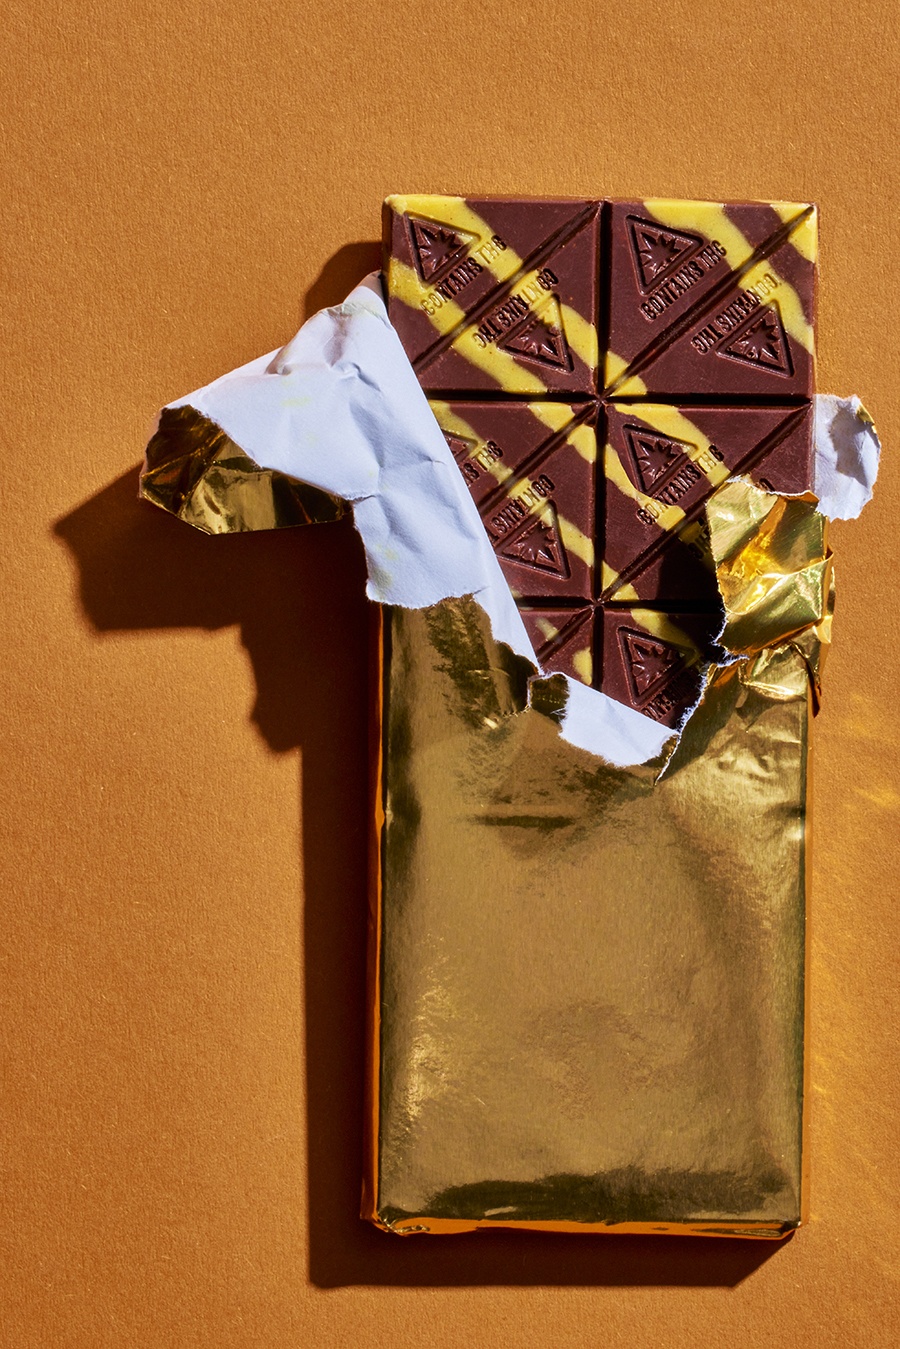 An infused chocolate bar with yellow stripes is shown in its partially opened golden wrapper.